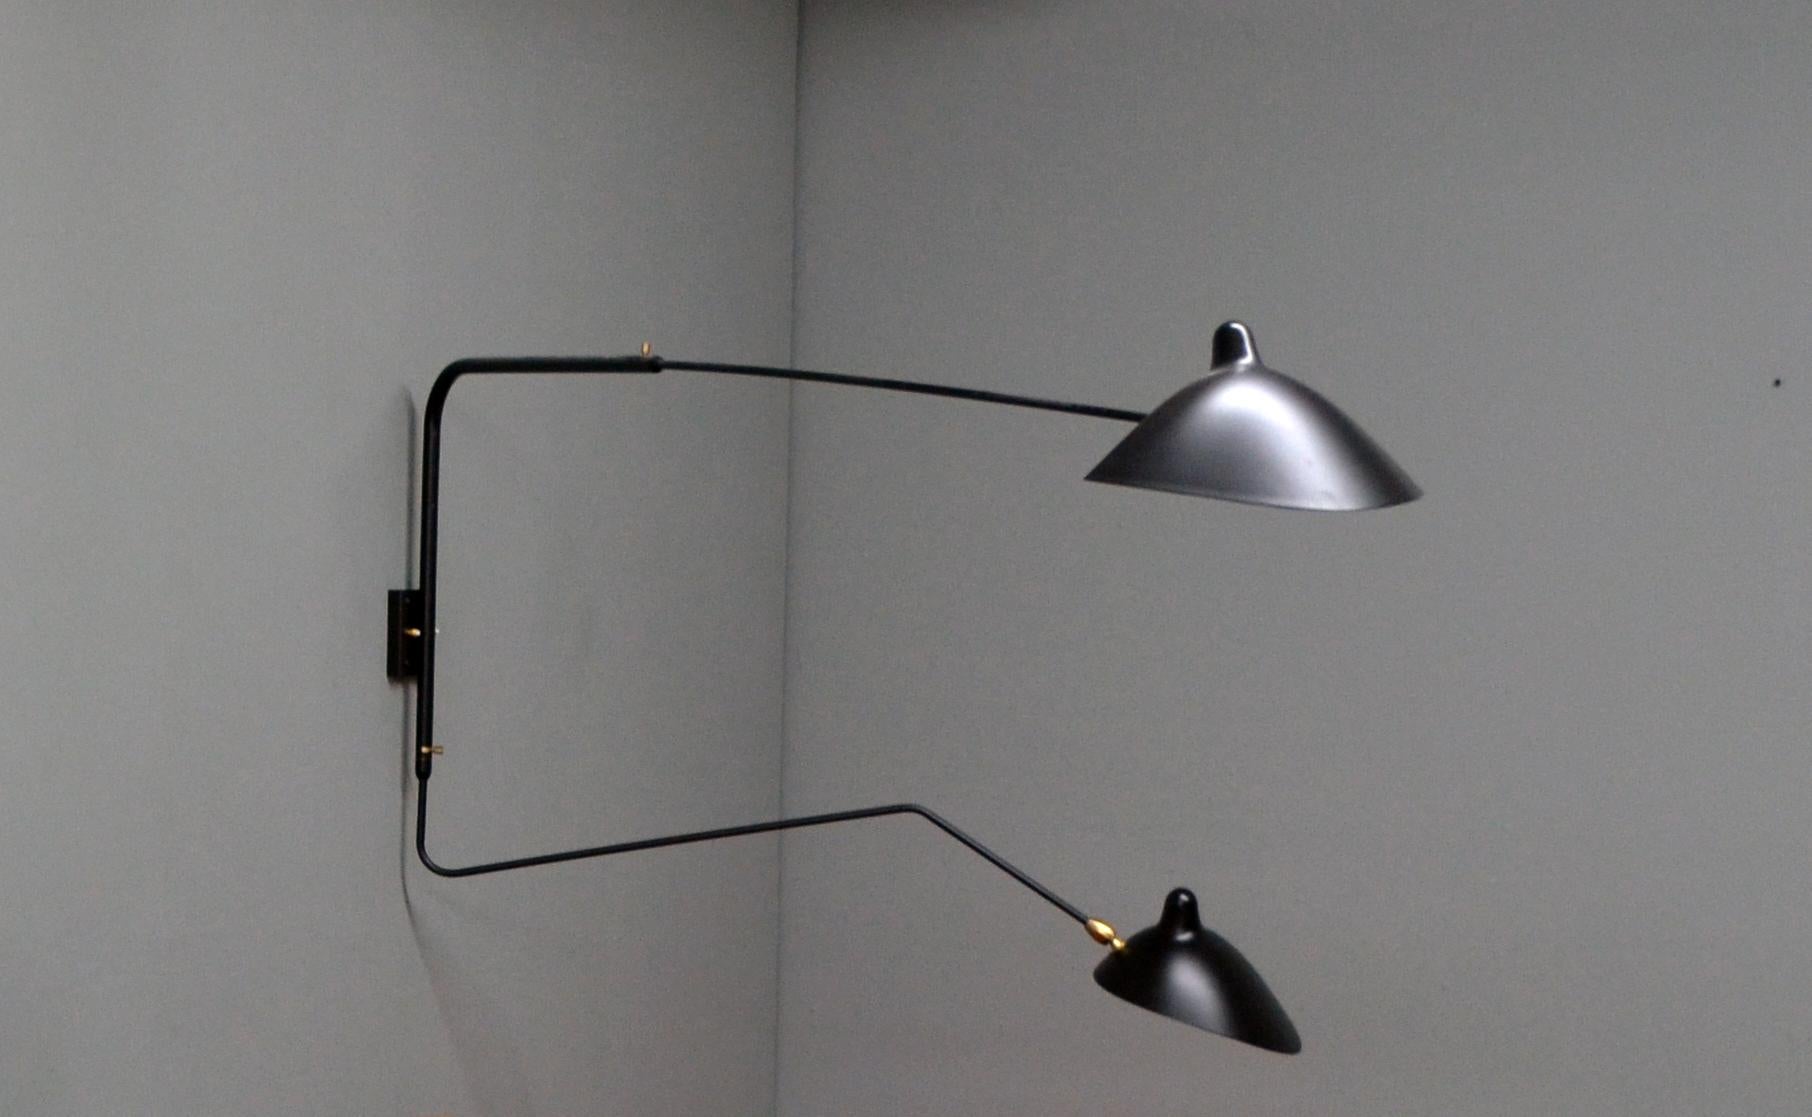 Painted Serge Mouille - Rotating Sconce with 2 Arms (1 Curved) in Black - IN STOCK! For Sale